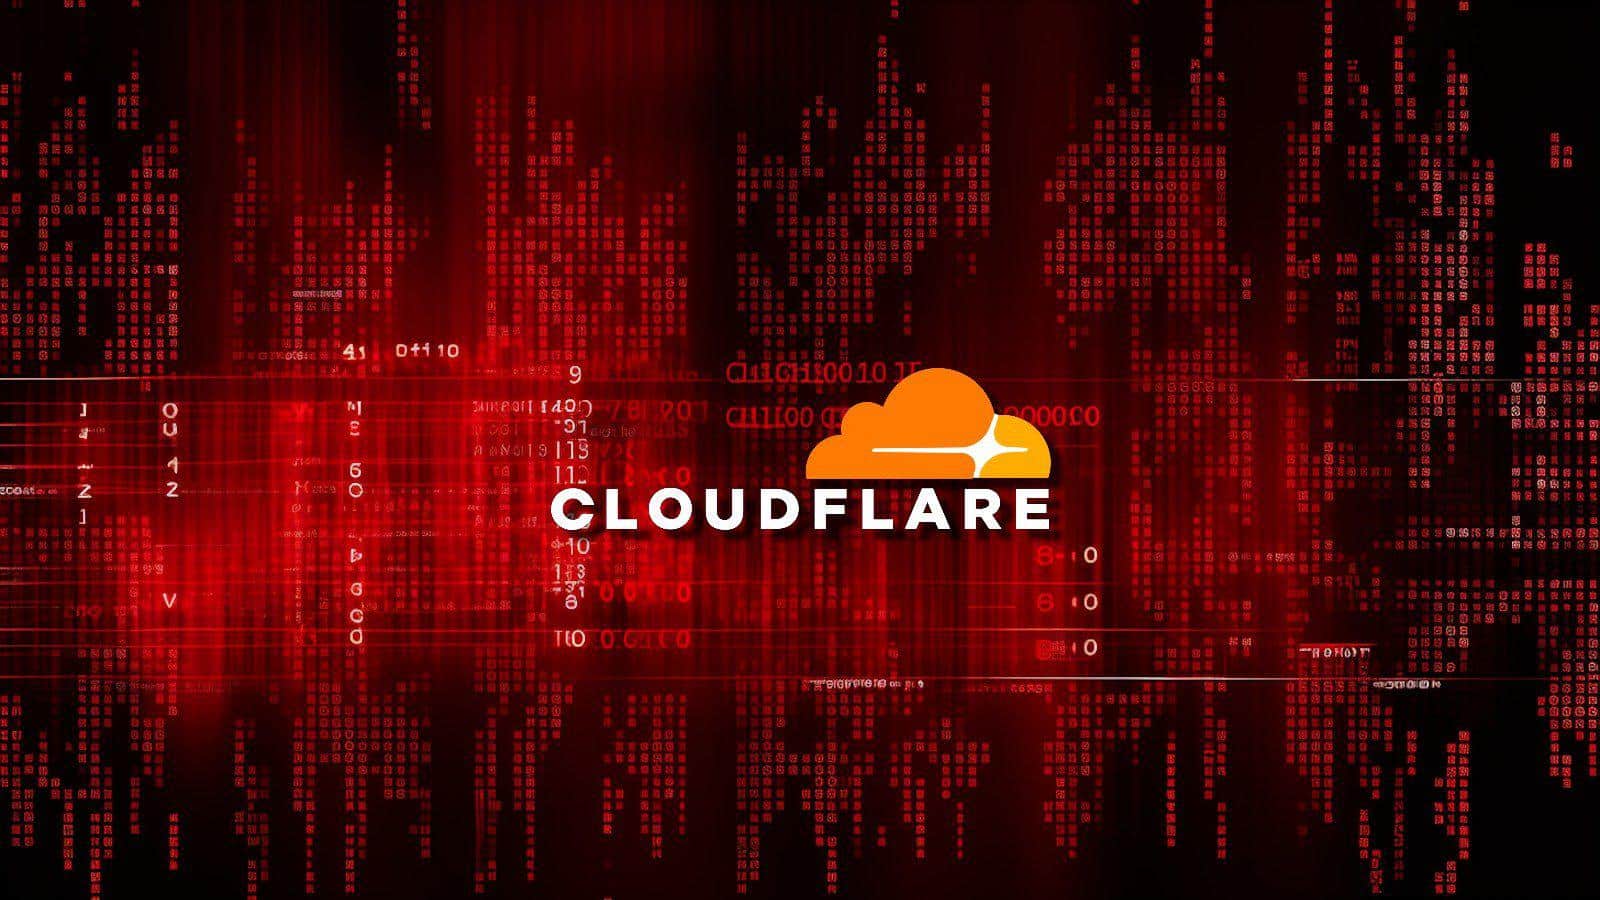 Cloudflare hacked using auth tokens stolen in Okta attack